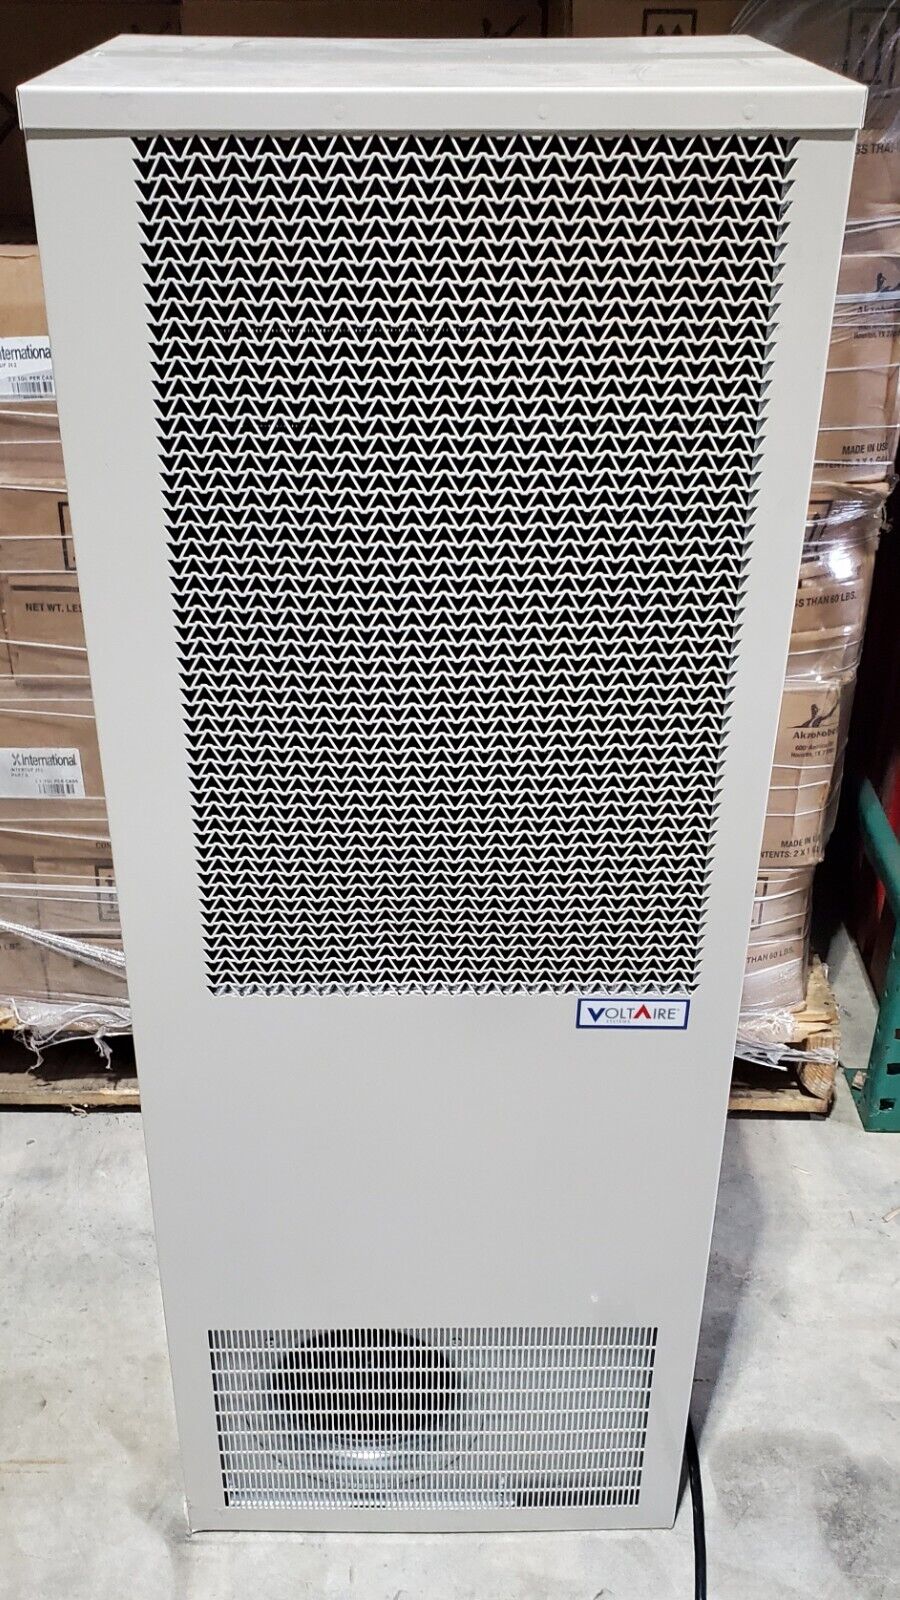 Voltaire AT08RMW07 Industrial Cabinet Cooler backup heat 8,000 BTU 115V AC Dent